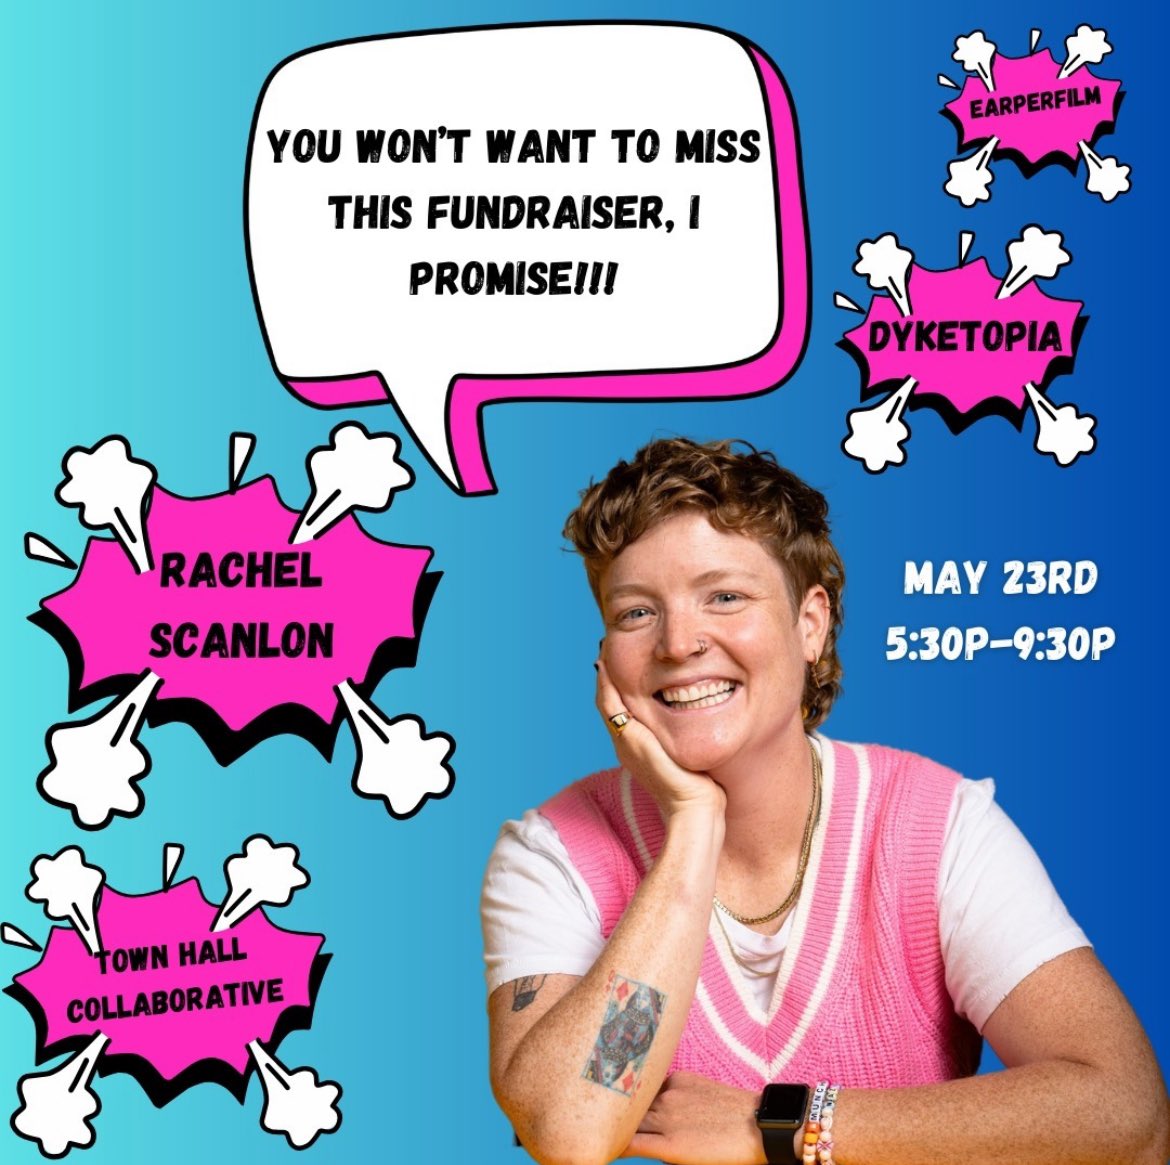 Two weeks, y’all! If you can’t make it, think about donating! #ItShouldntBeThisHard #WynonnaEarp #ALeagueOfTheirOwn 
Tix: eventbrite.com/e/it-shouldnt-…
Donate: gofund.me/6c3db48b